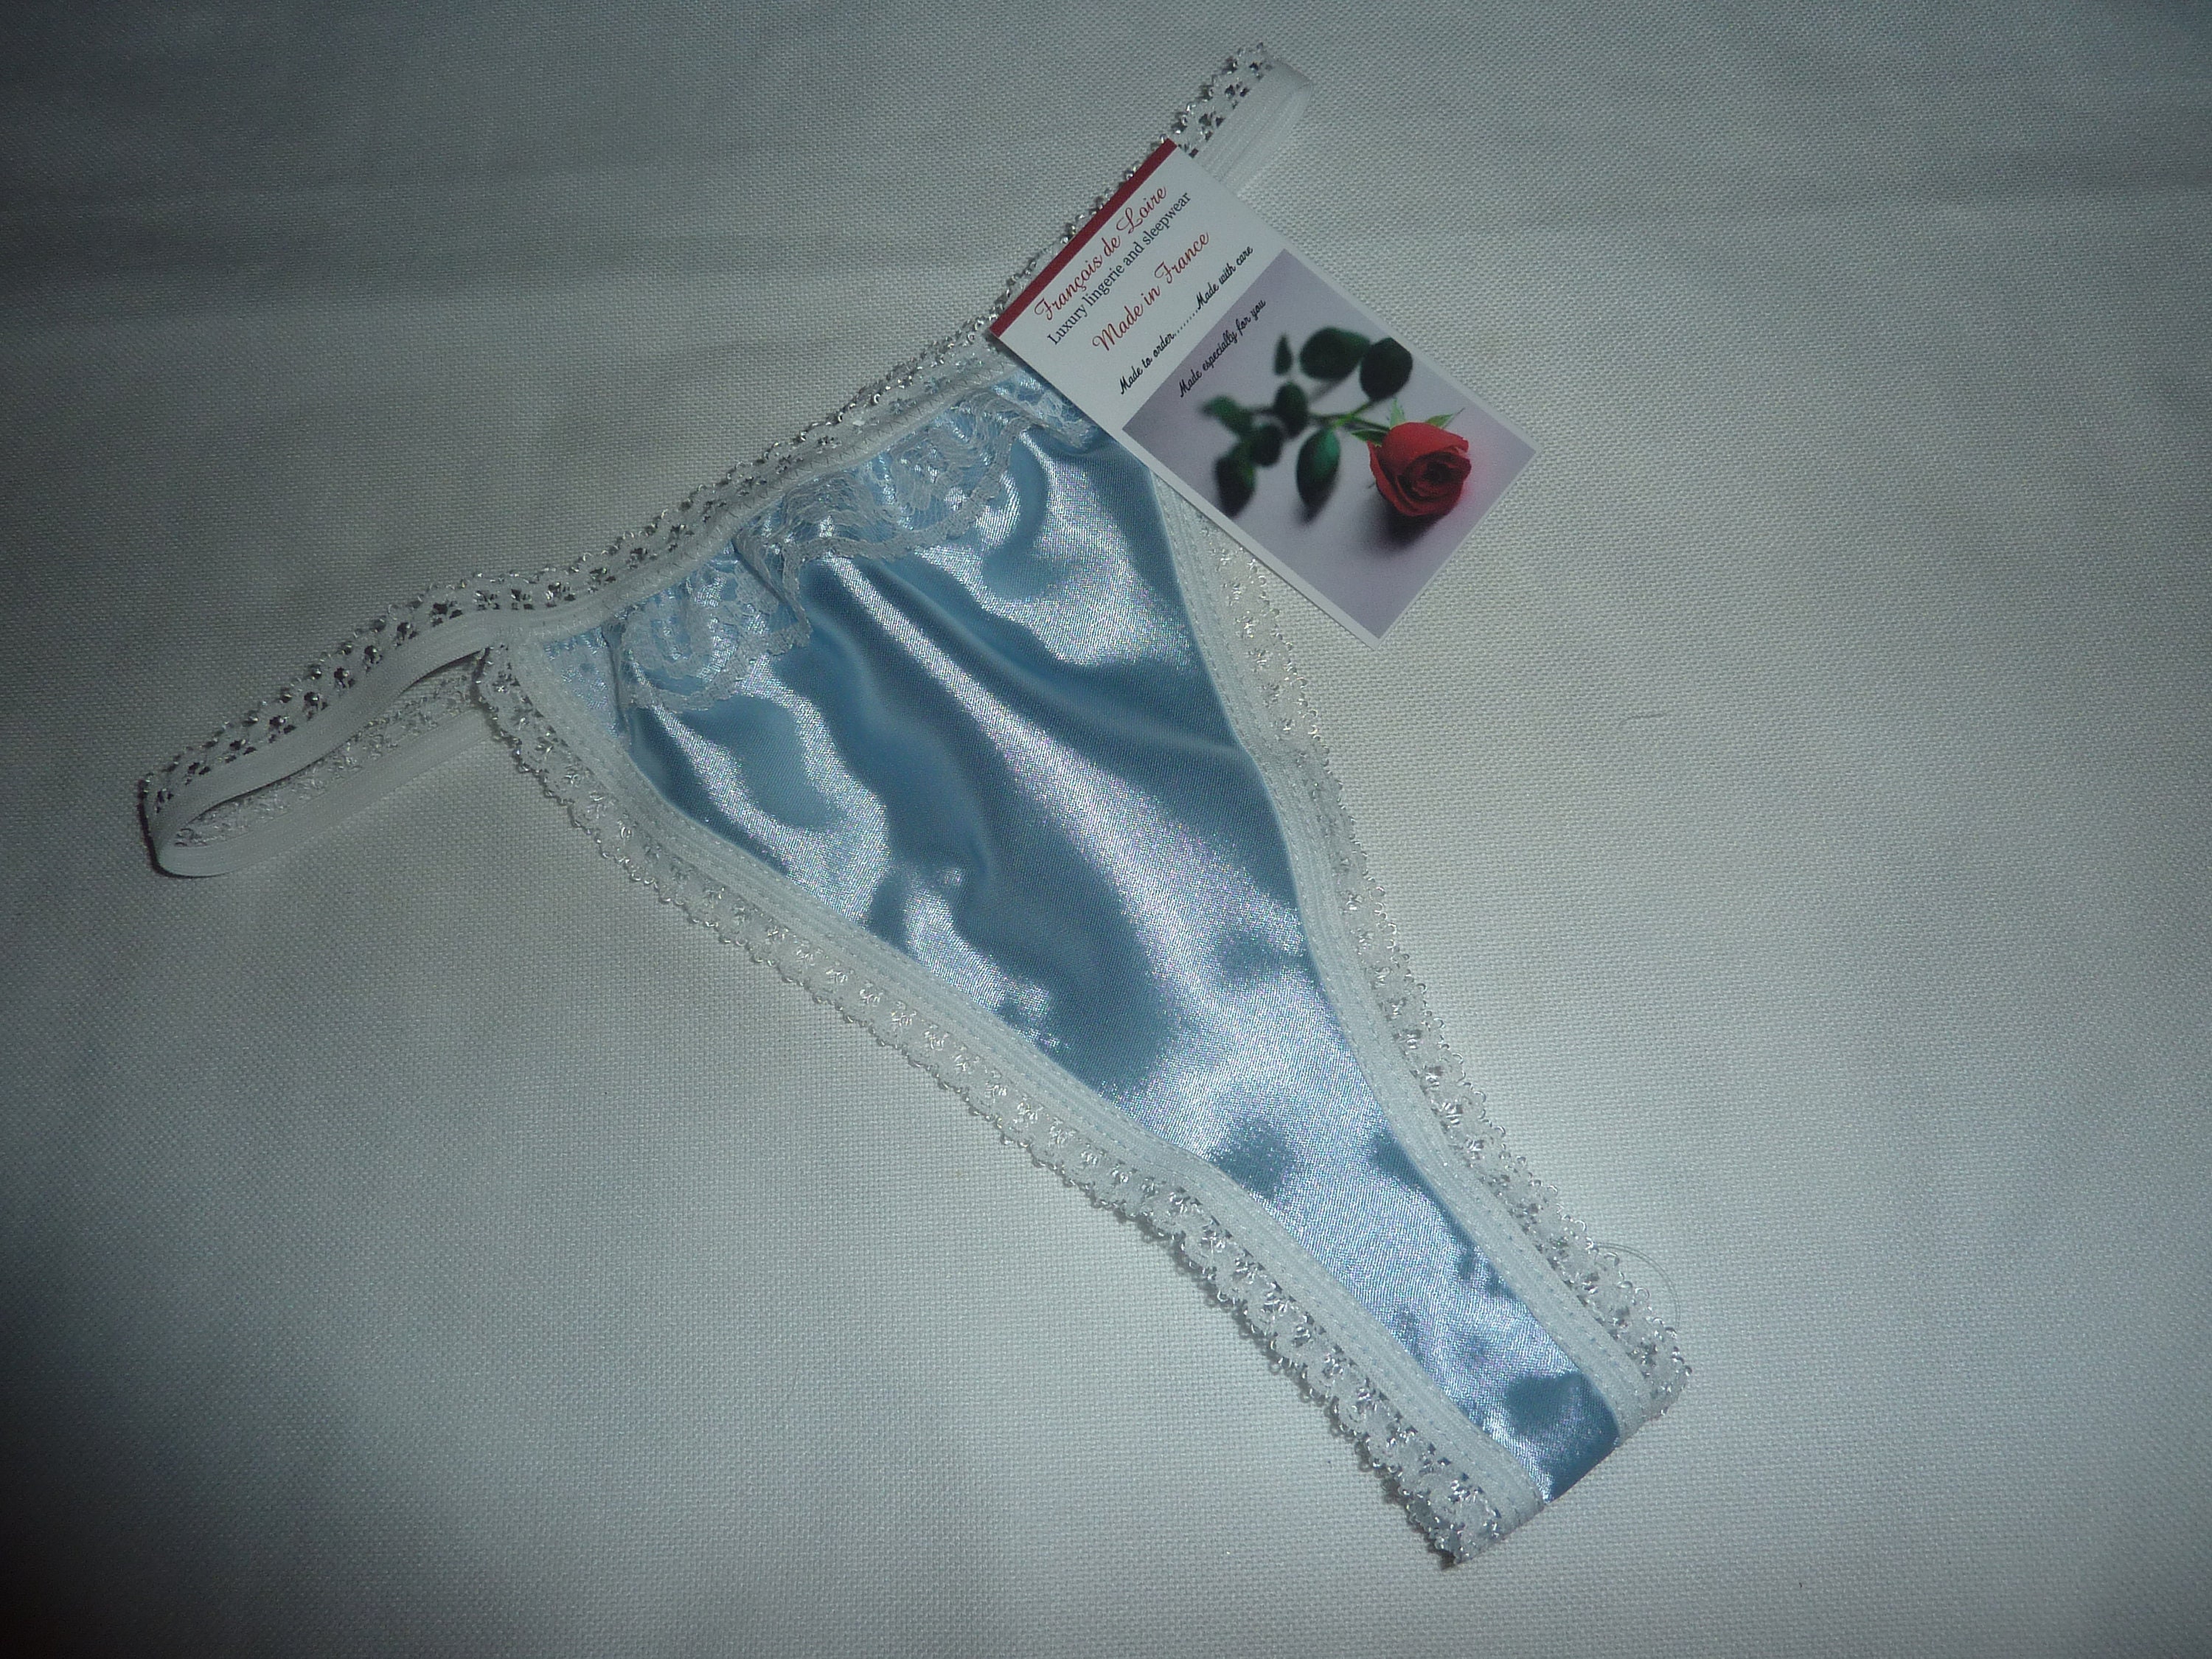 Pale Blue Shiny Satin Thong With Ivory Lace Trim. Cheeky Skimpy